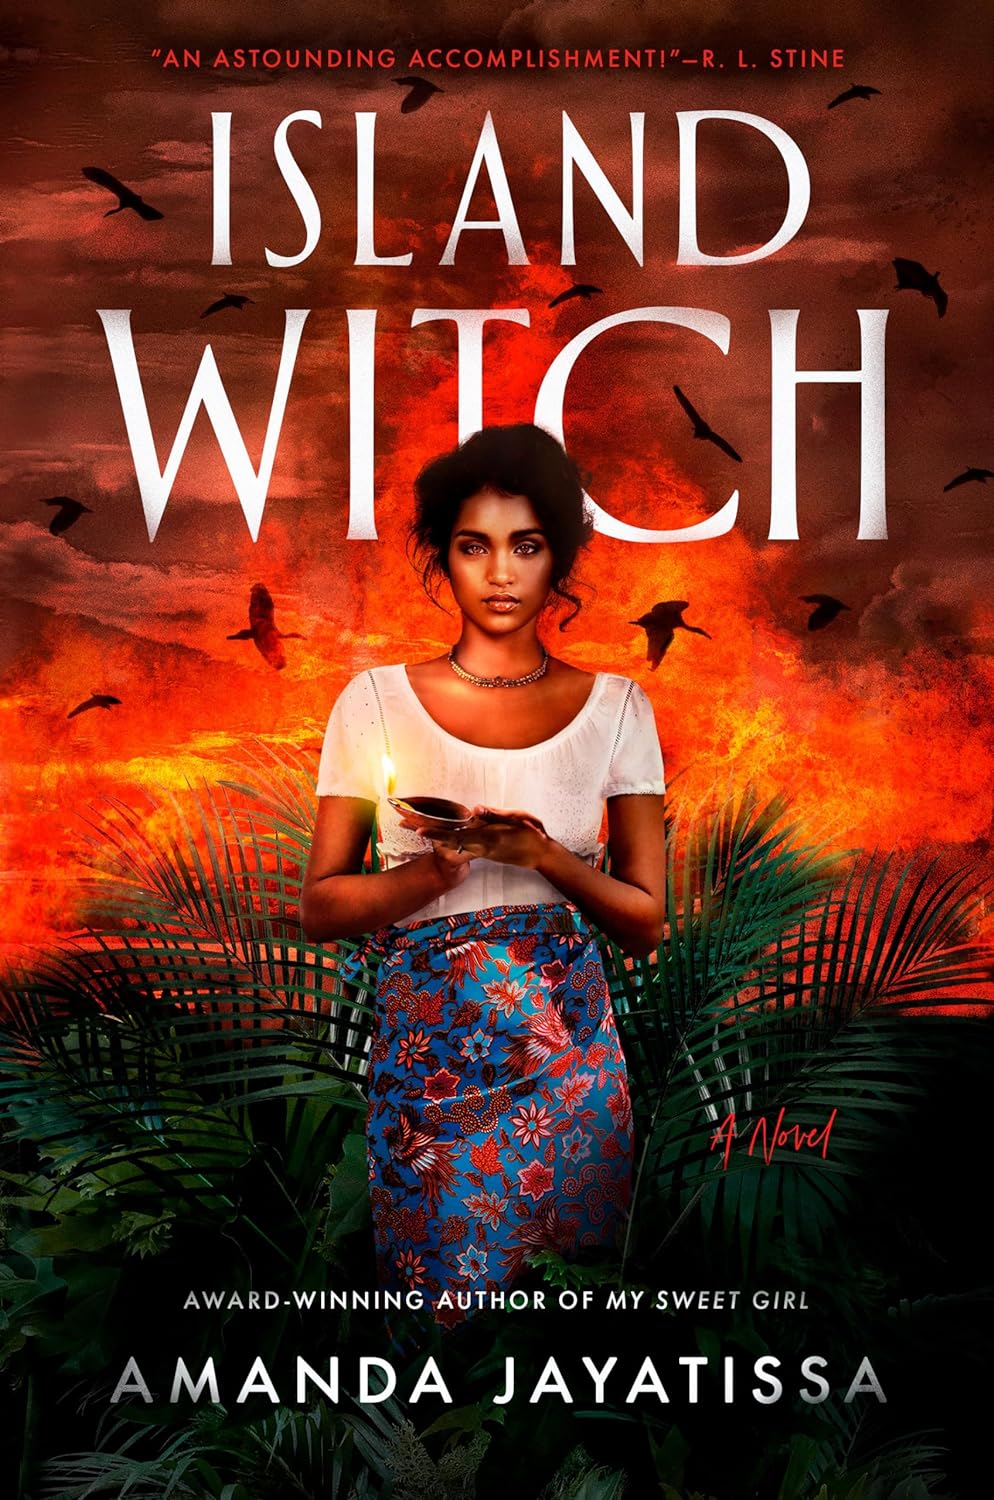 Image for "Island Witch"